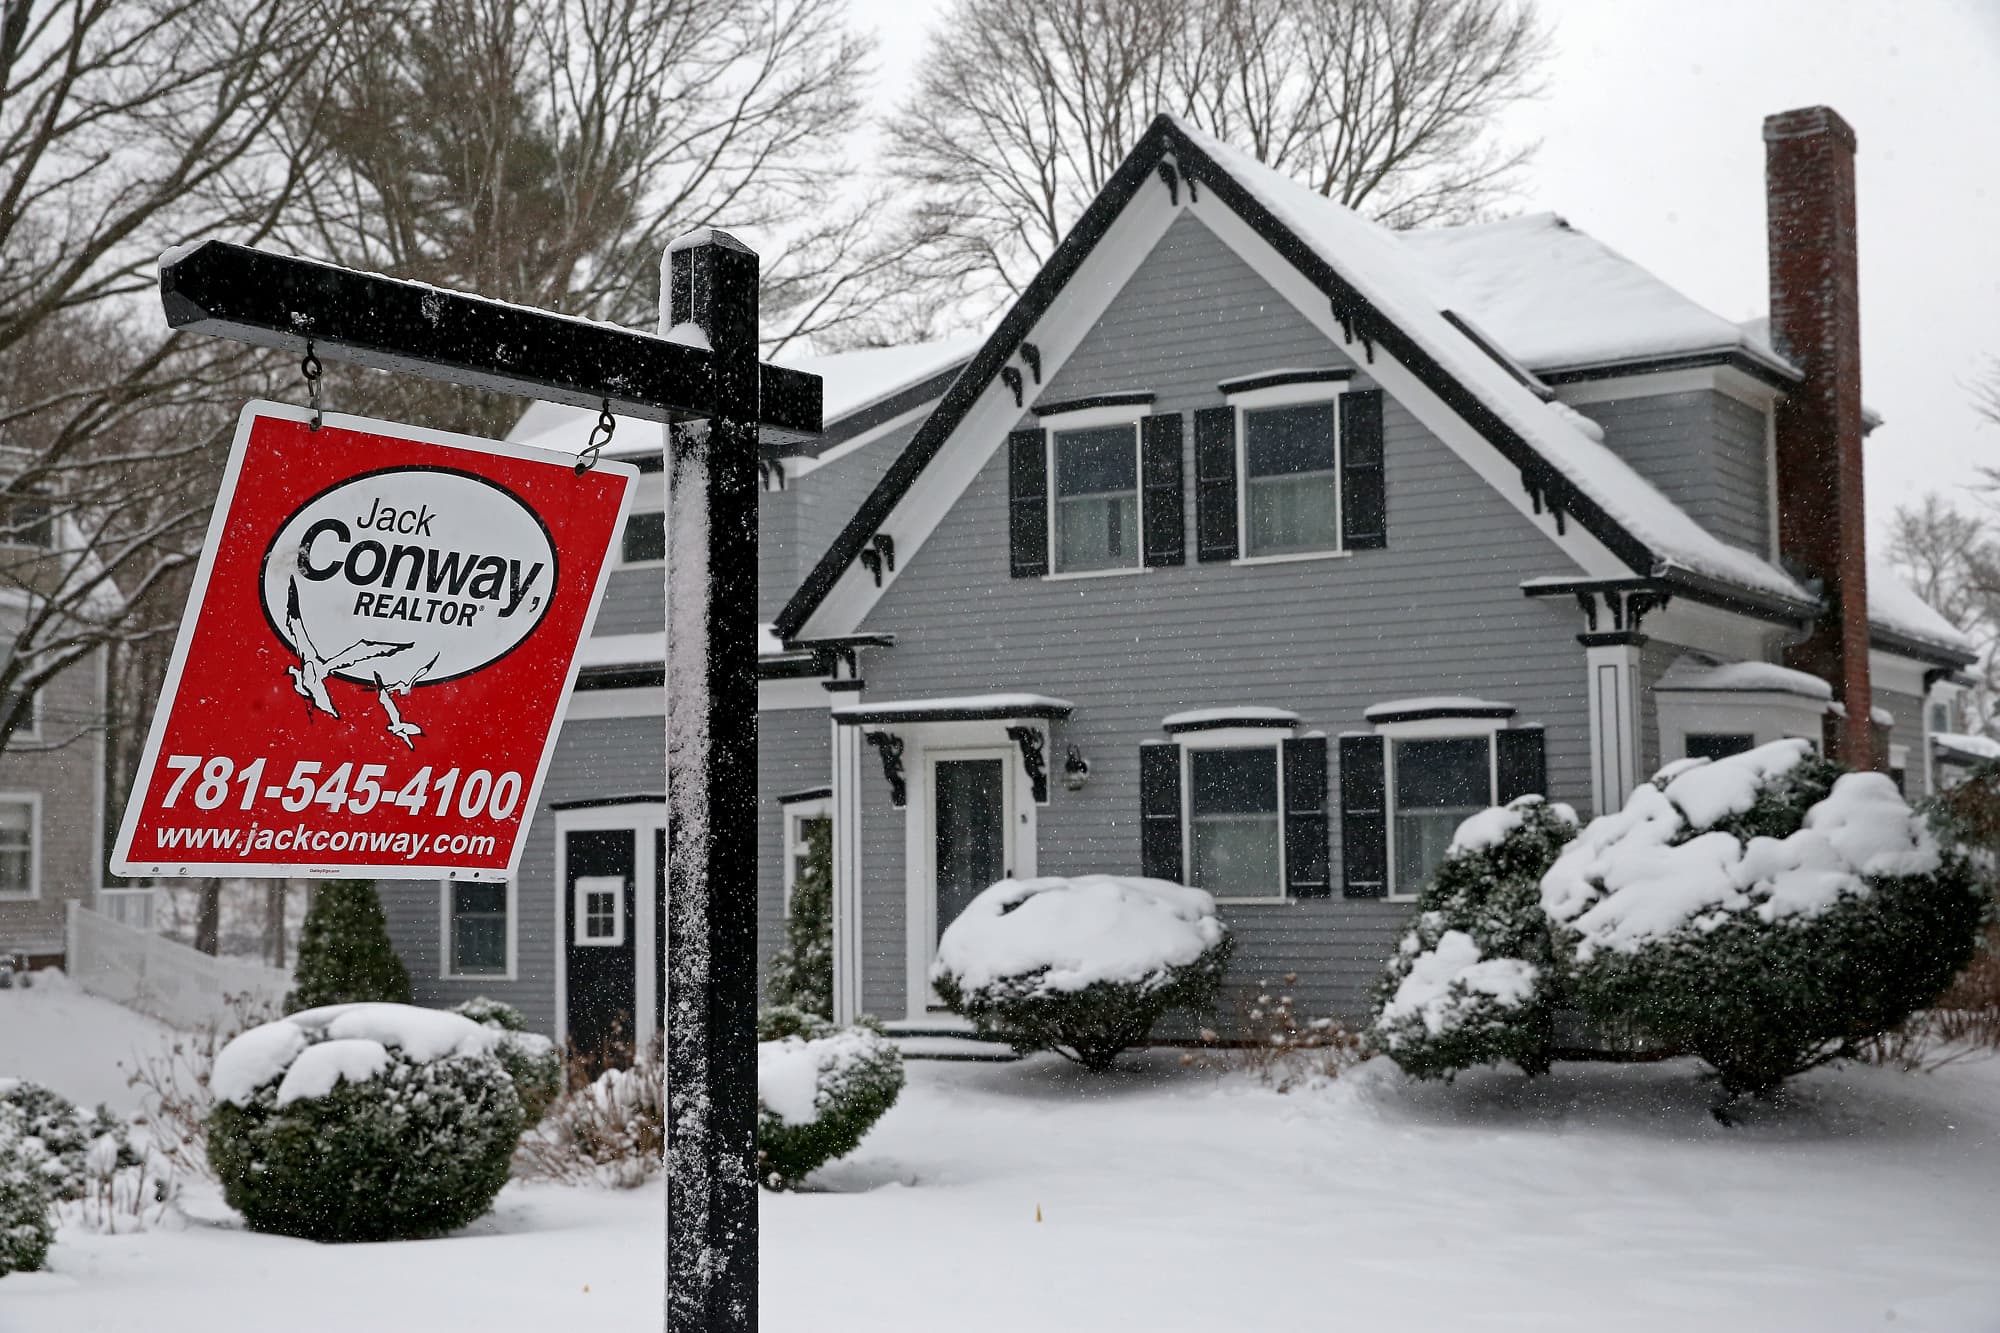 Existing home sales rose slightly in January, but the record low supply outweighed the market